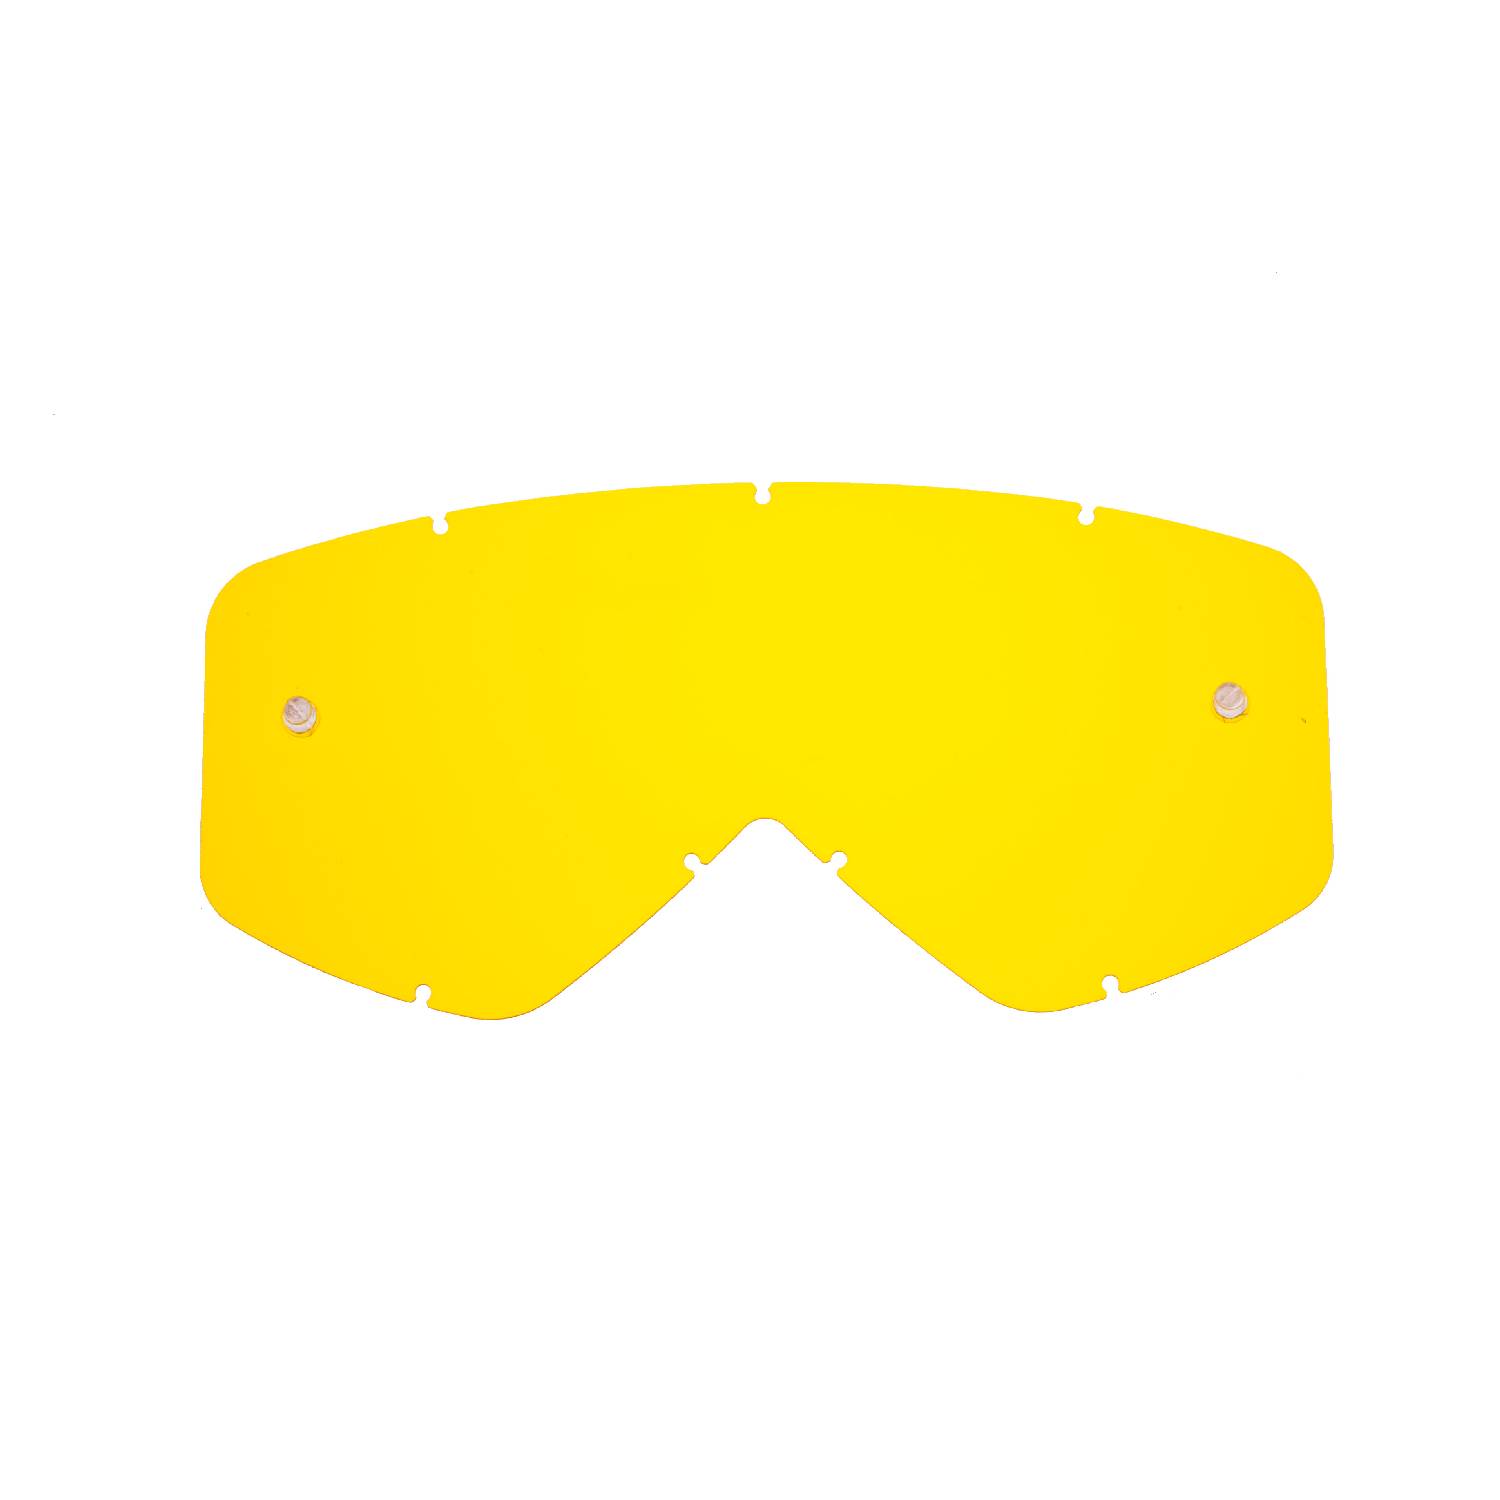 yellow replacement lenses for goggles compatible for Smith Fuel / Intake / V1 / V2 goggle